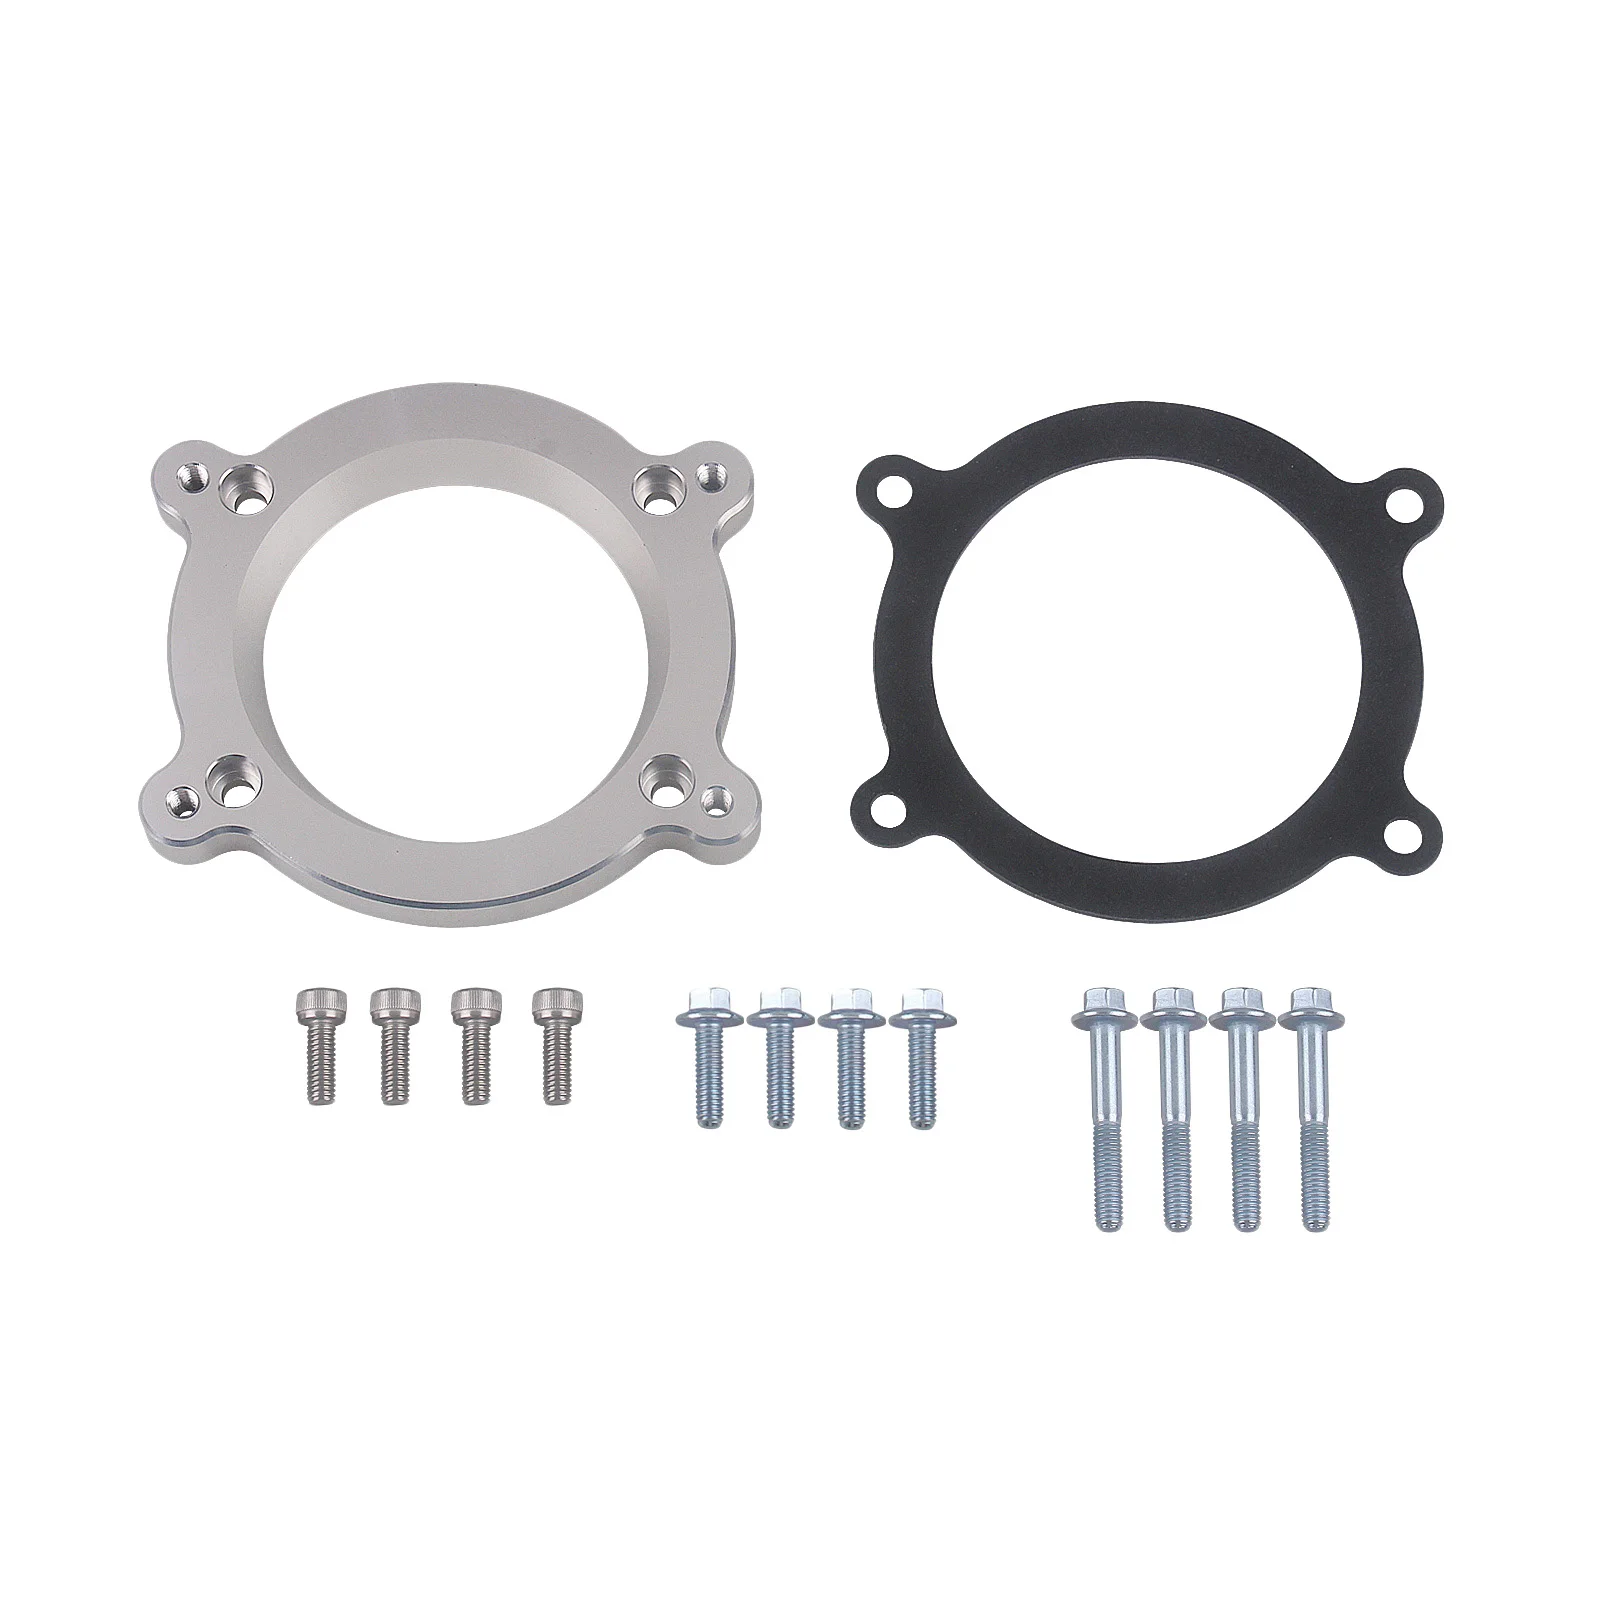 LS4 Intake Manifold to LS3 DBW Throttle Body Adapter Plate Kit Replacement